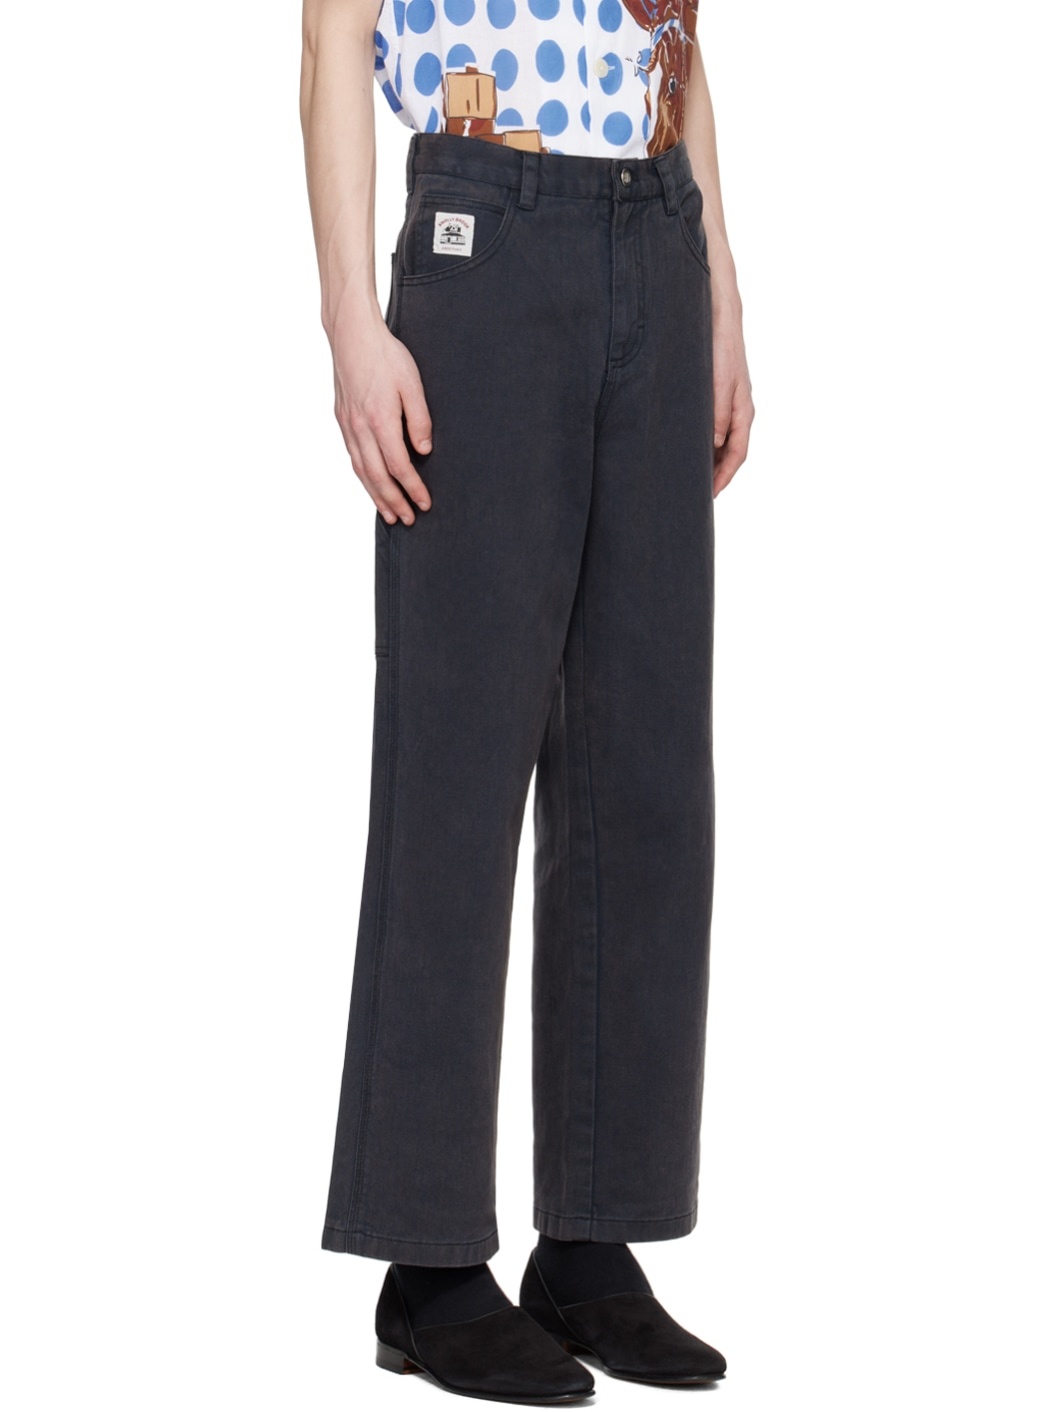 Black Knolly Brook Trousers - 2